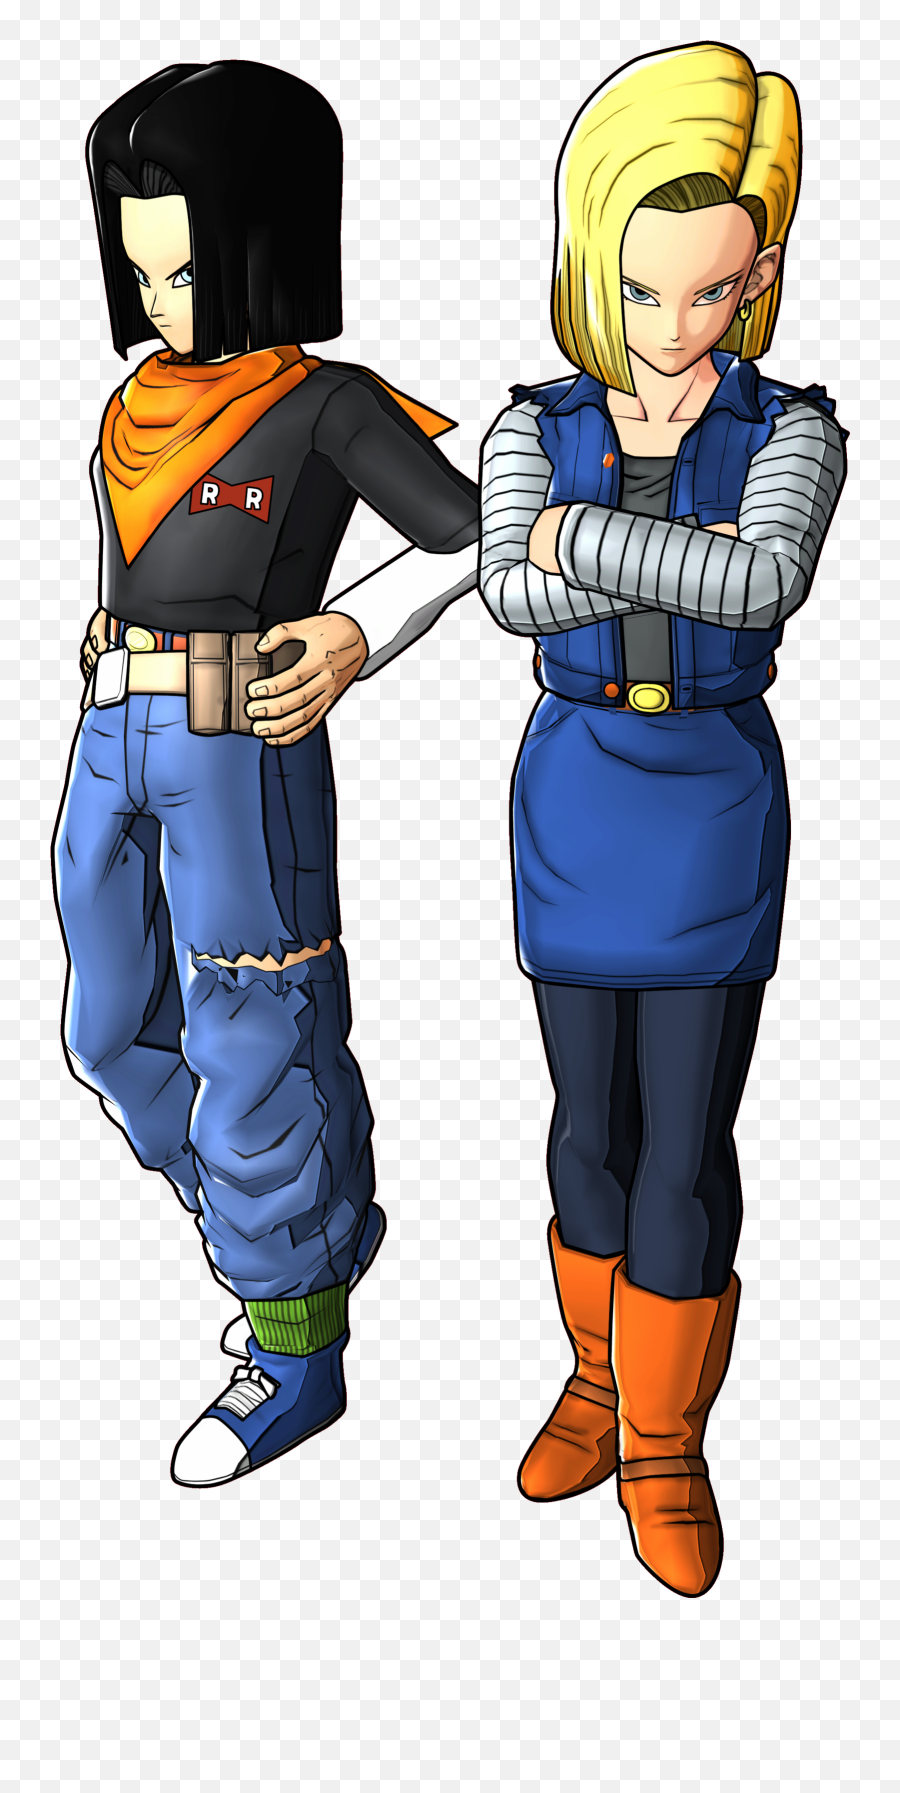 Android 18 - Android 17 Out Fit Emoji,Android 18 Png